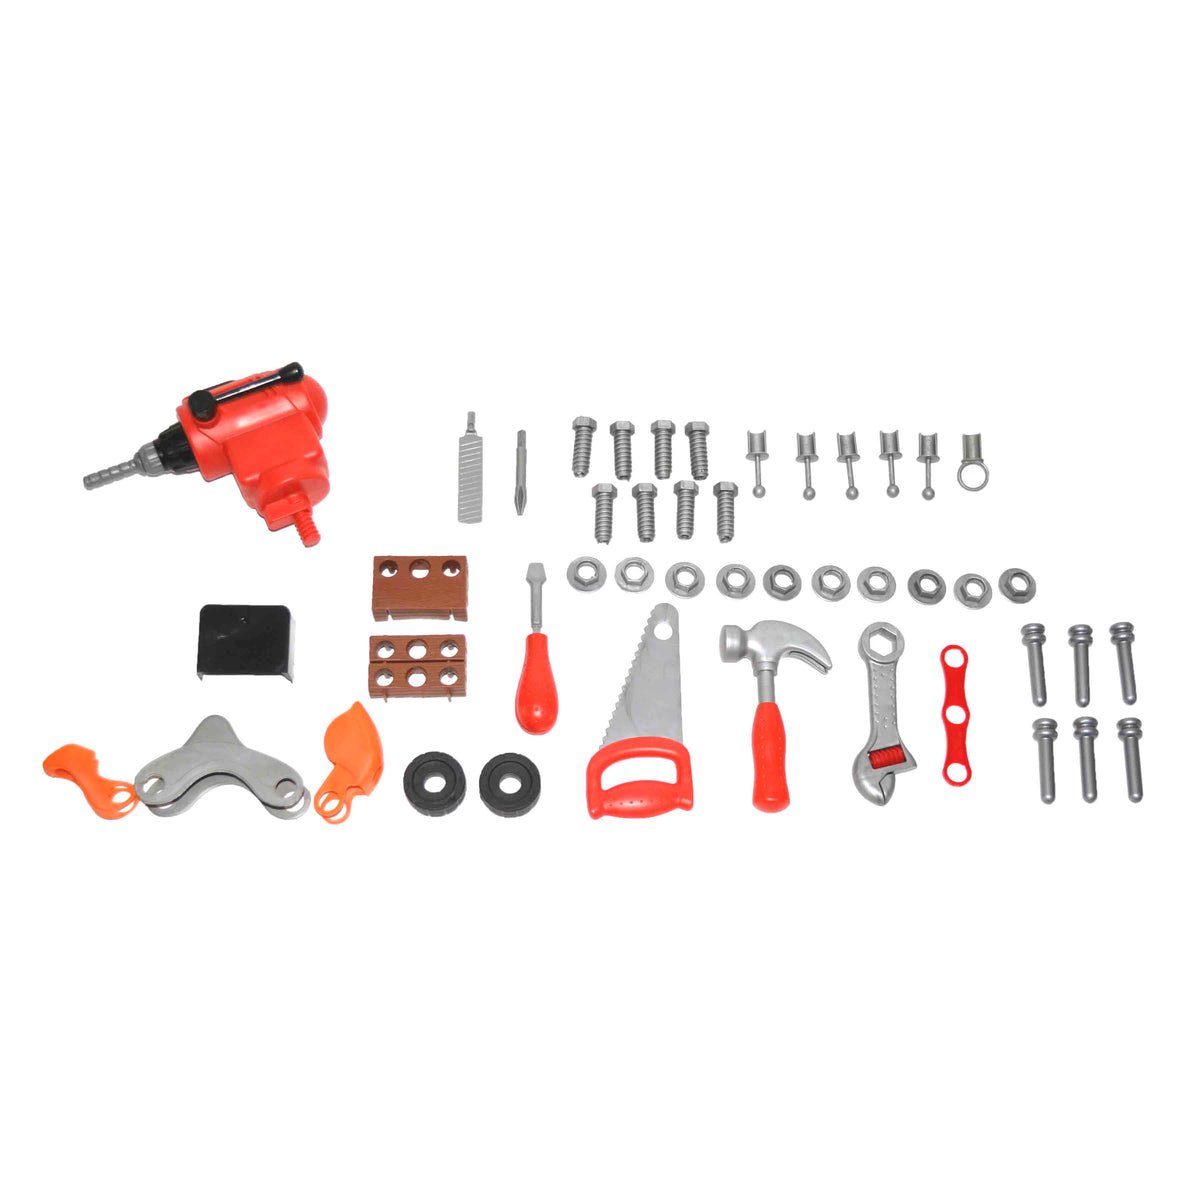 Accessories of the Children's Tool Workbench Playset - including a red drill, grey screws & pegs as well as a saw and a hammer.